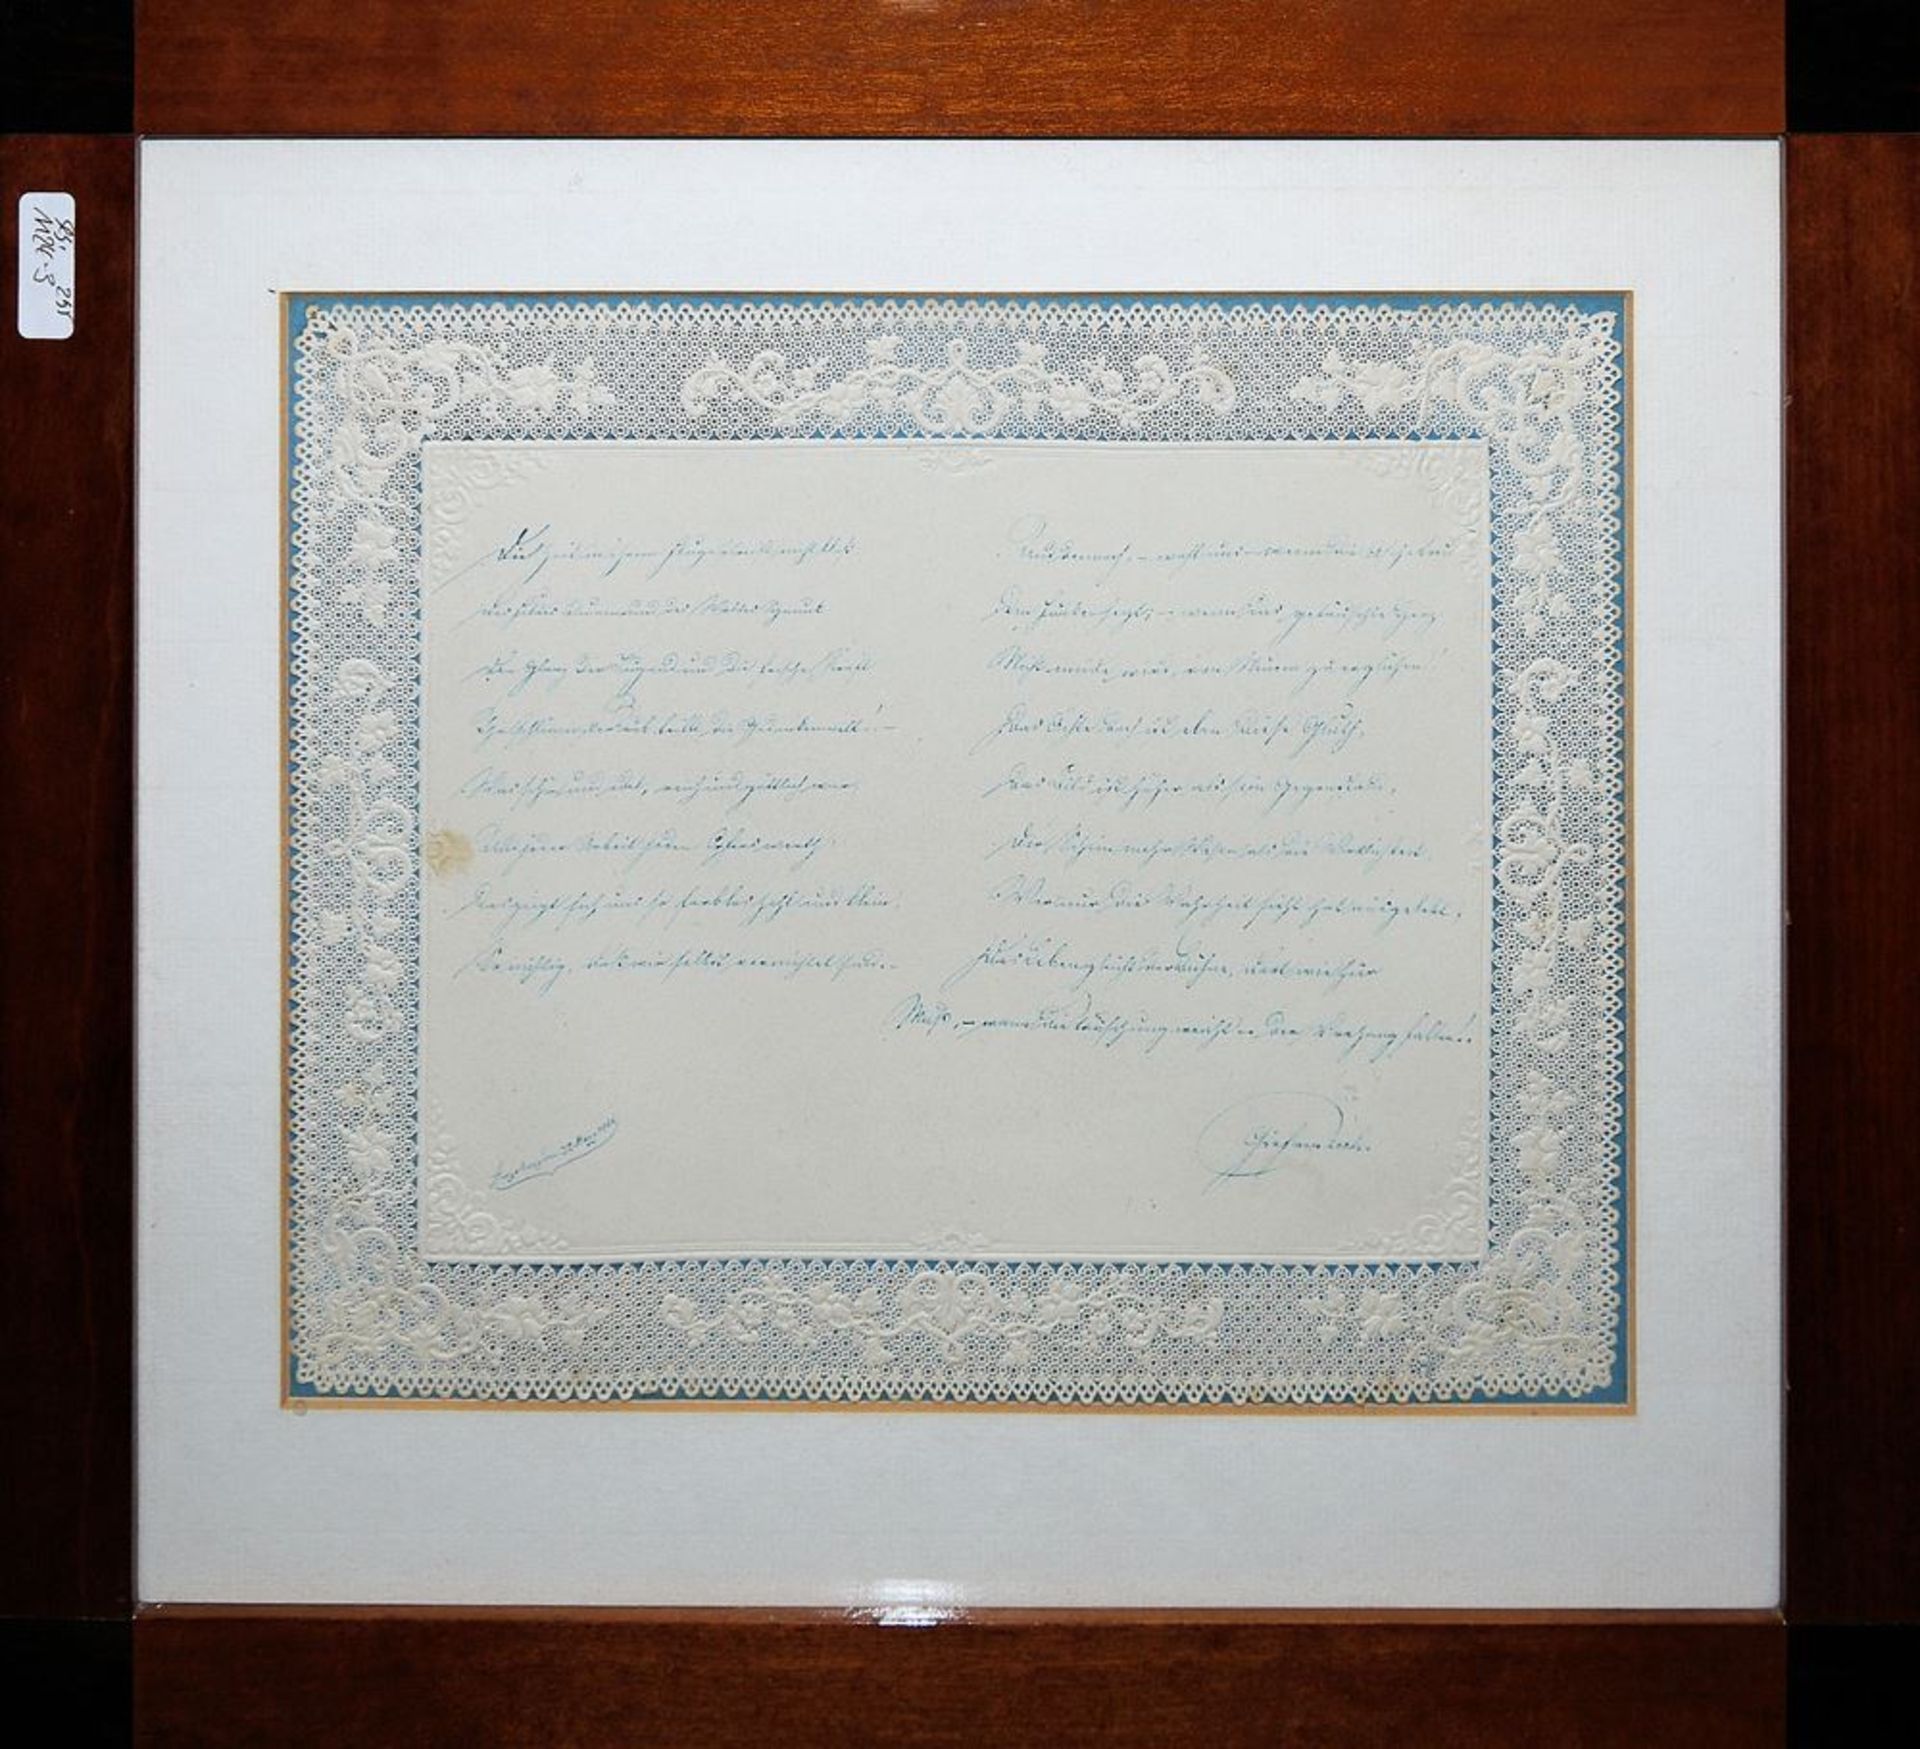 Bamboo étagère, embroidered cover, dedication on luxury paper and collection of portrait photograph - Image 4 of 4